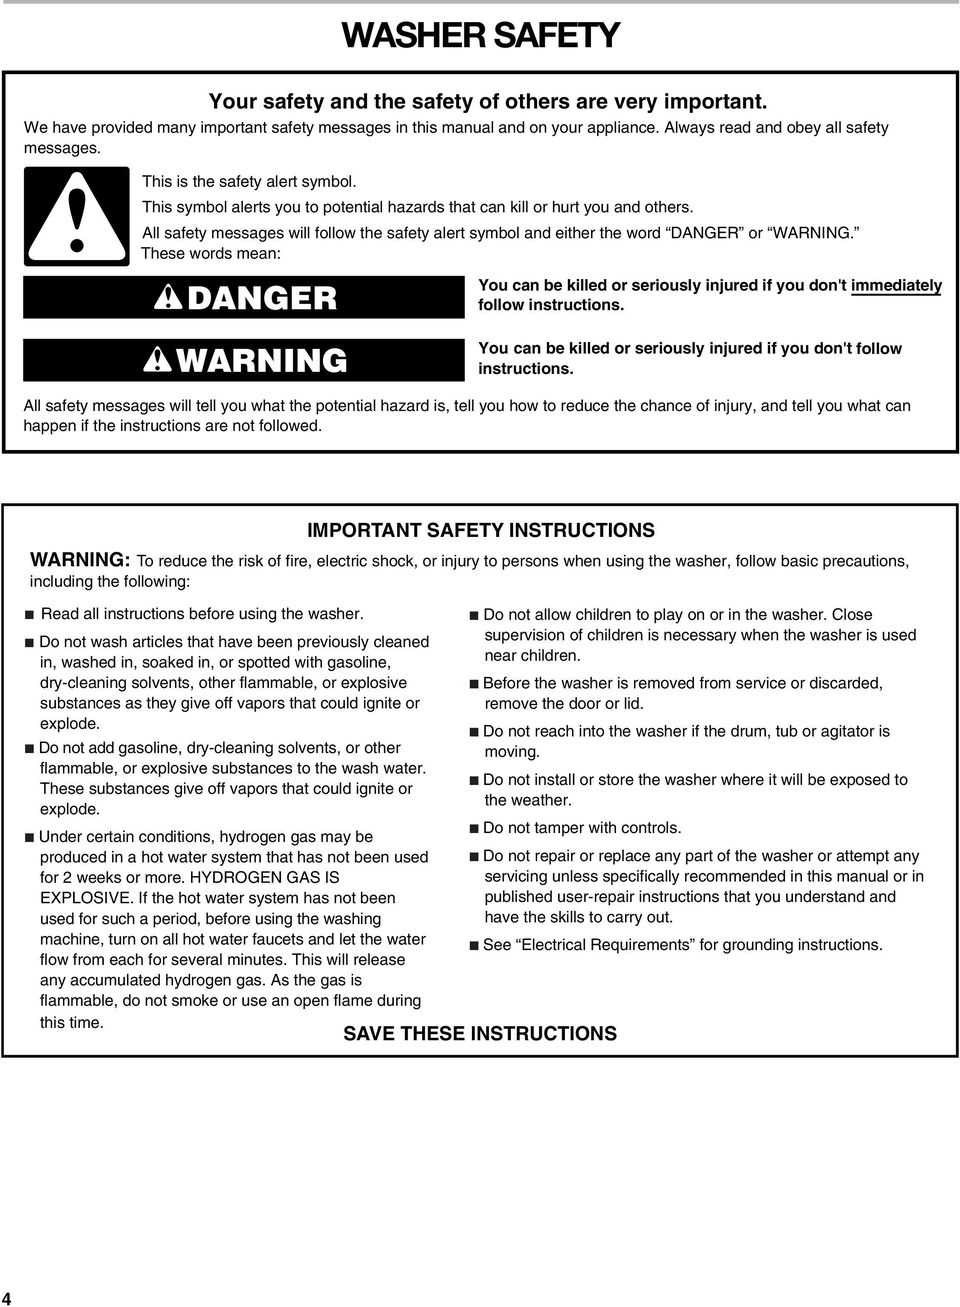 All safety messages will follow the safety alert symbol and either the word DANGER or WARNING.